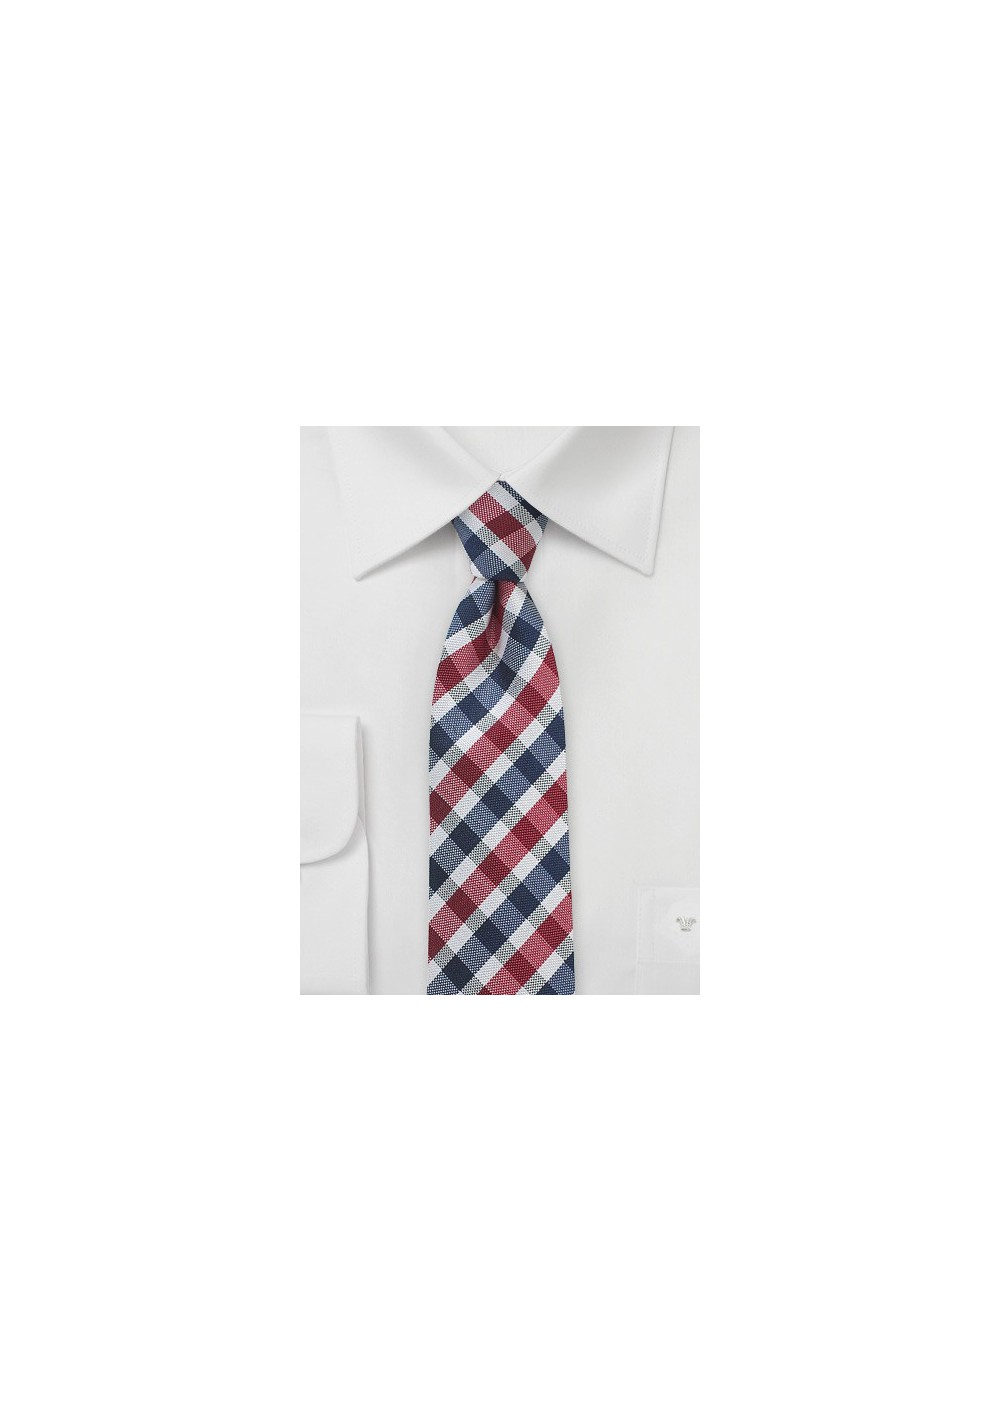 Gingham Tie in Navy and Red